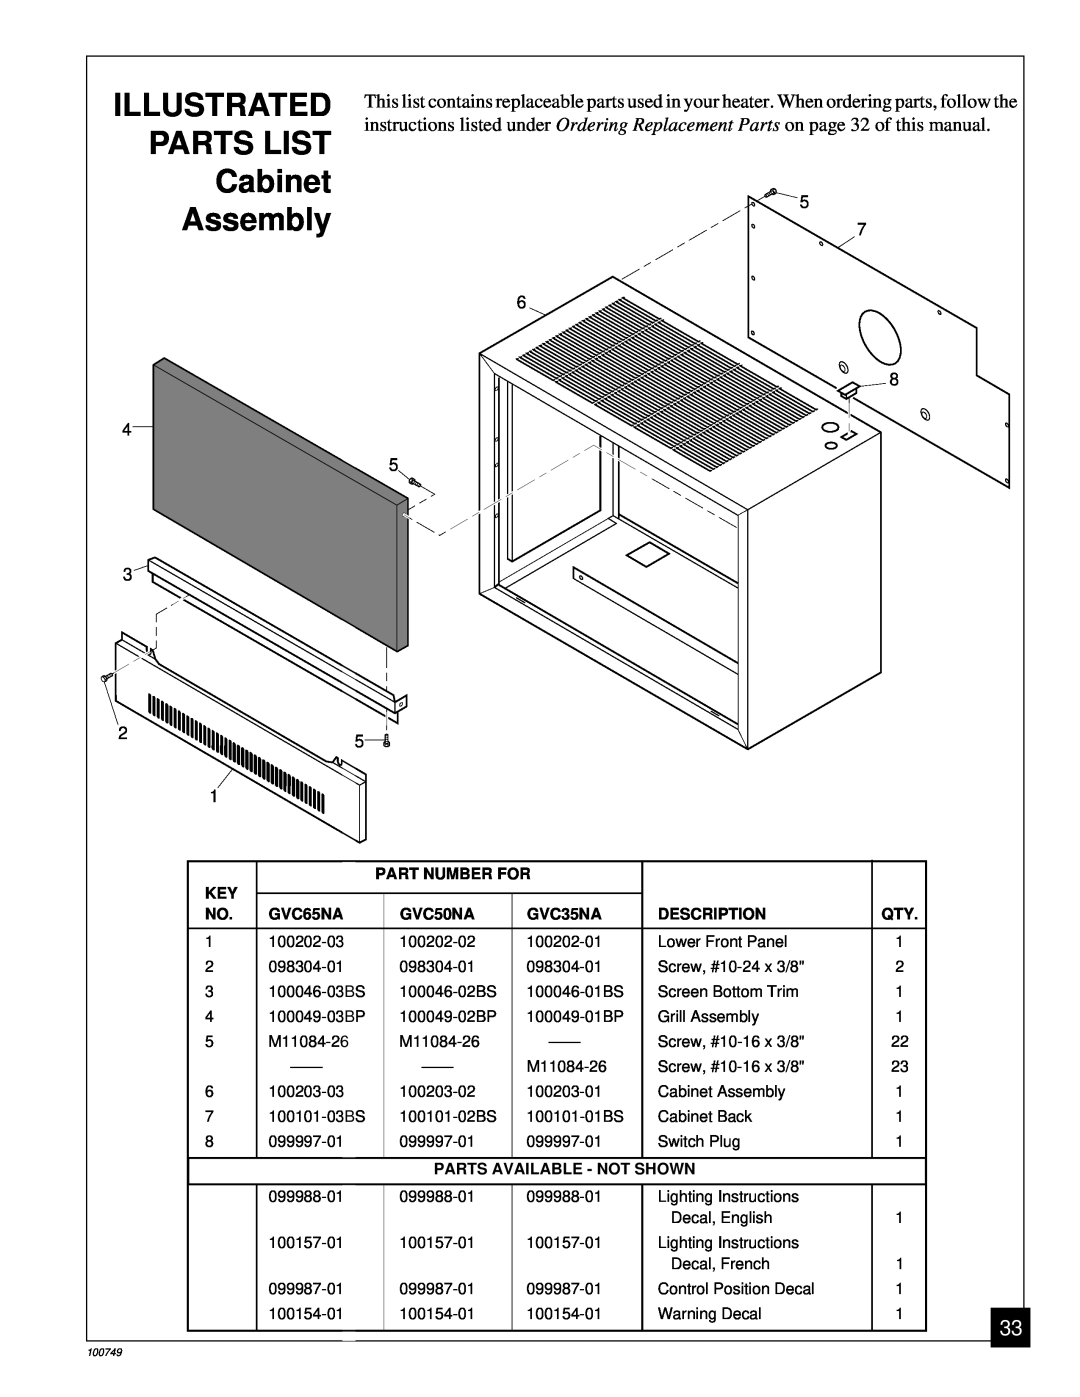 Desa GVC50NA installation manual ILLUSTRATED PARTS LIST Cabinet Assembly, Part Number For, GVC65NA, GVC35NA, Description 